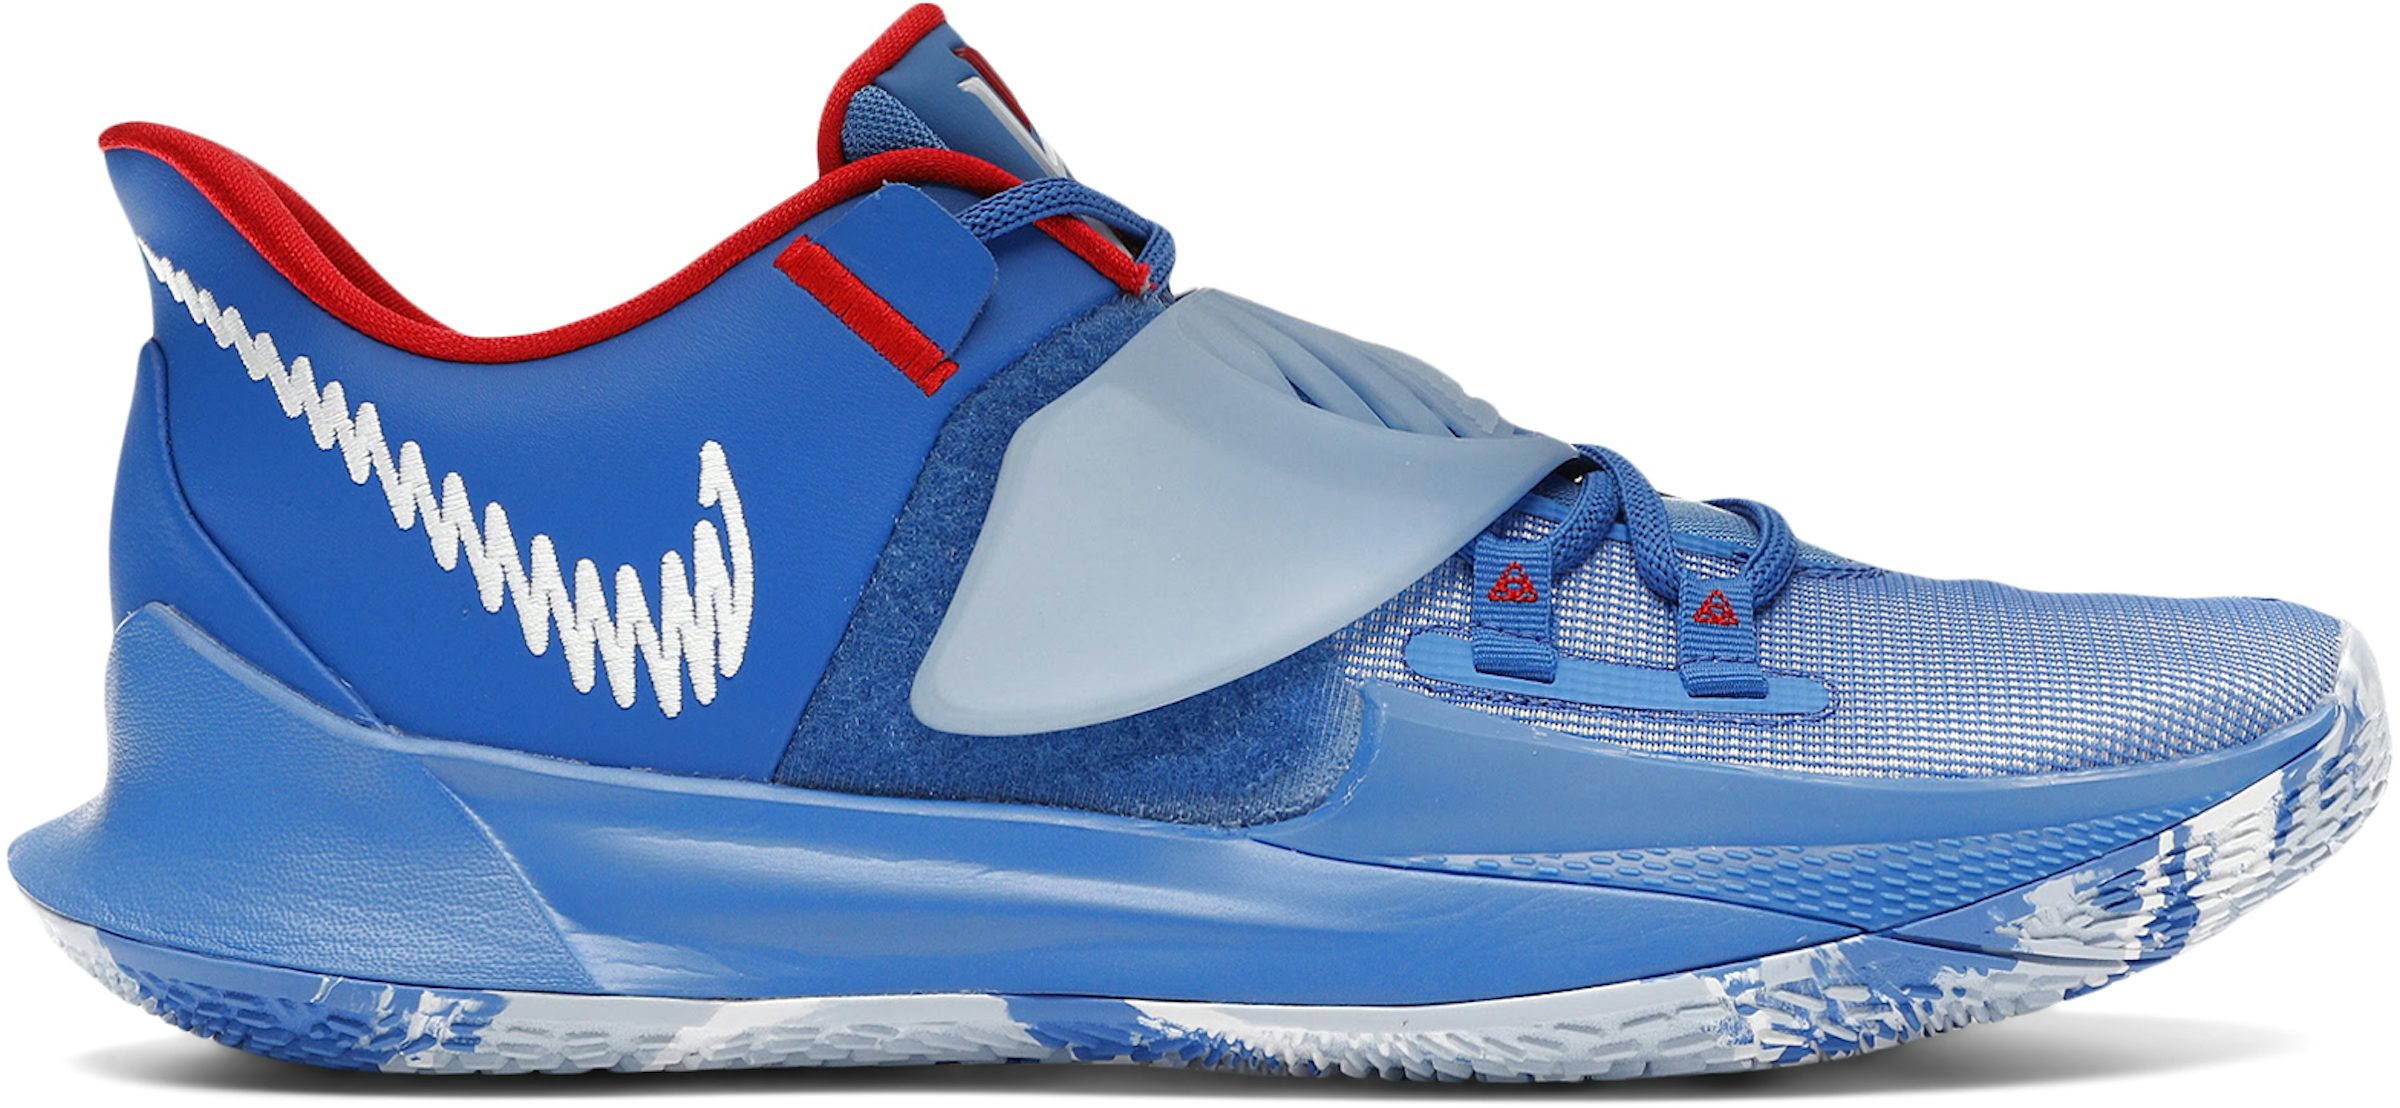 https://images.stockx.com/images/Nike-Kyrie-Low-3-Pacific-Blue-Product.jpg?fit=fill&bg=FFFFFF&w=1200&h=857&fm=jpg&auto=compress&dpr=2&trim=color&updated_at=1615921181&q=60